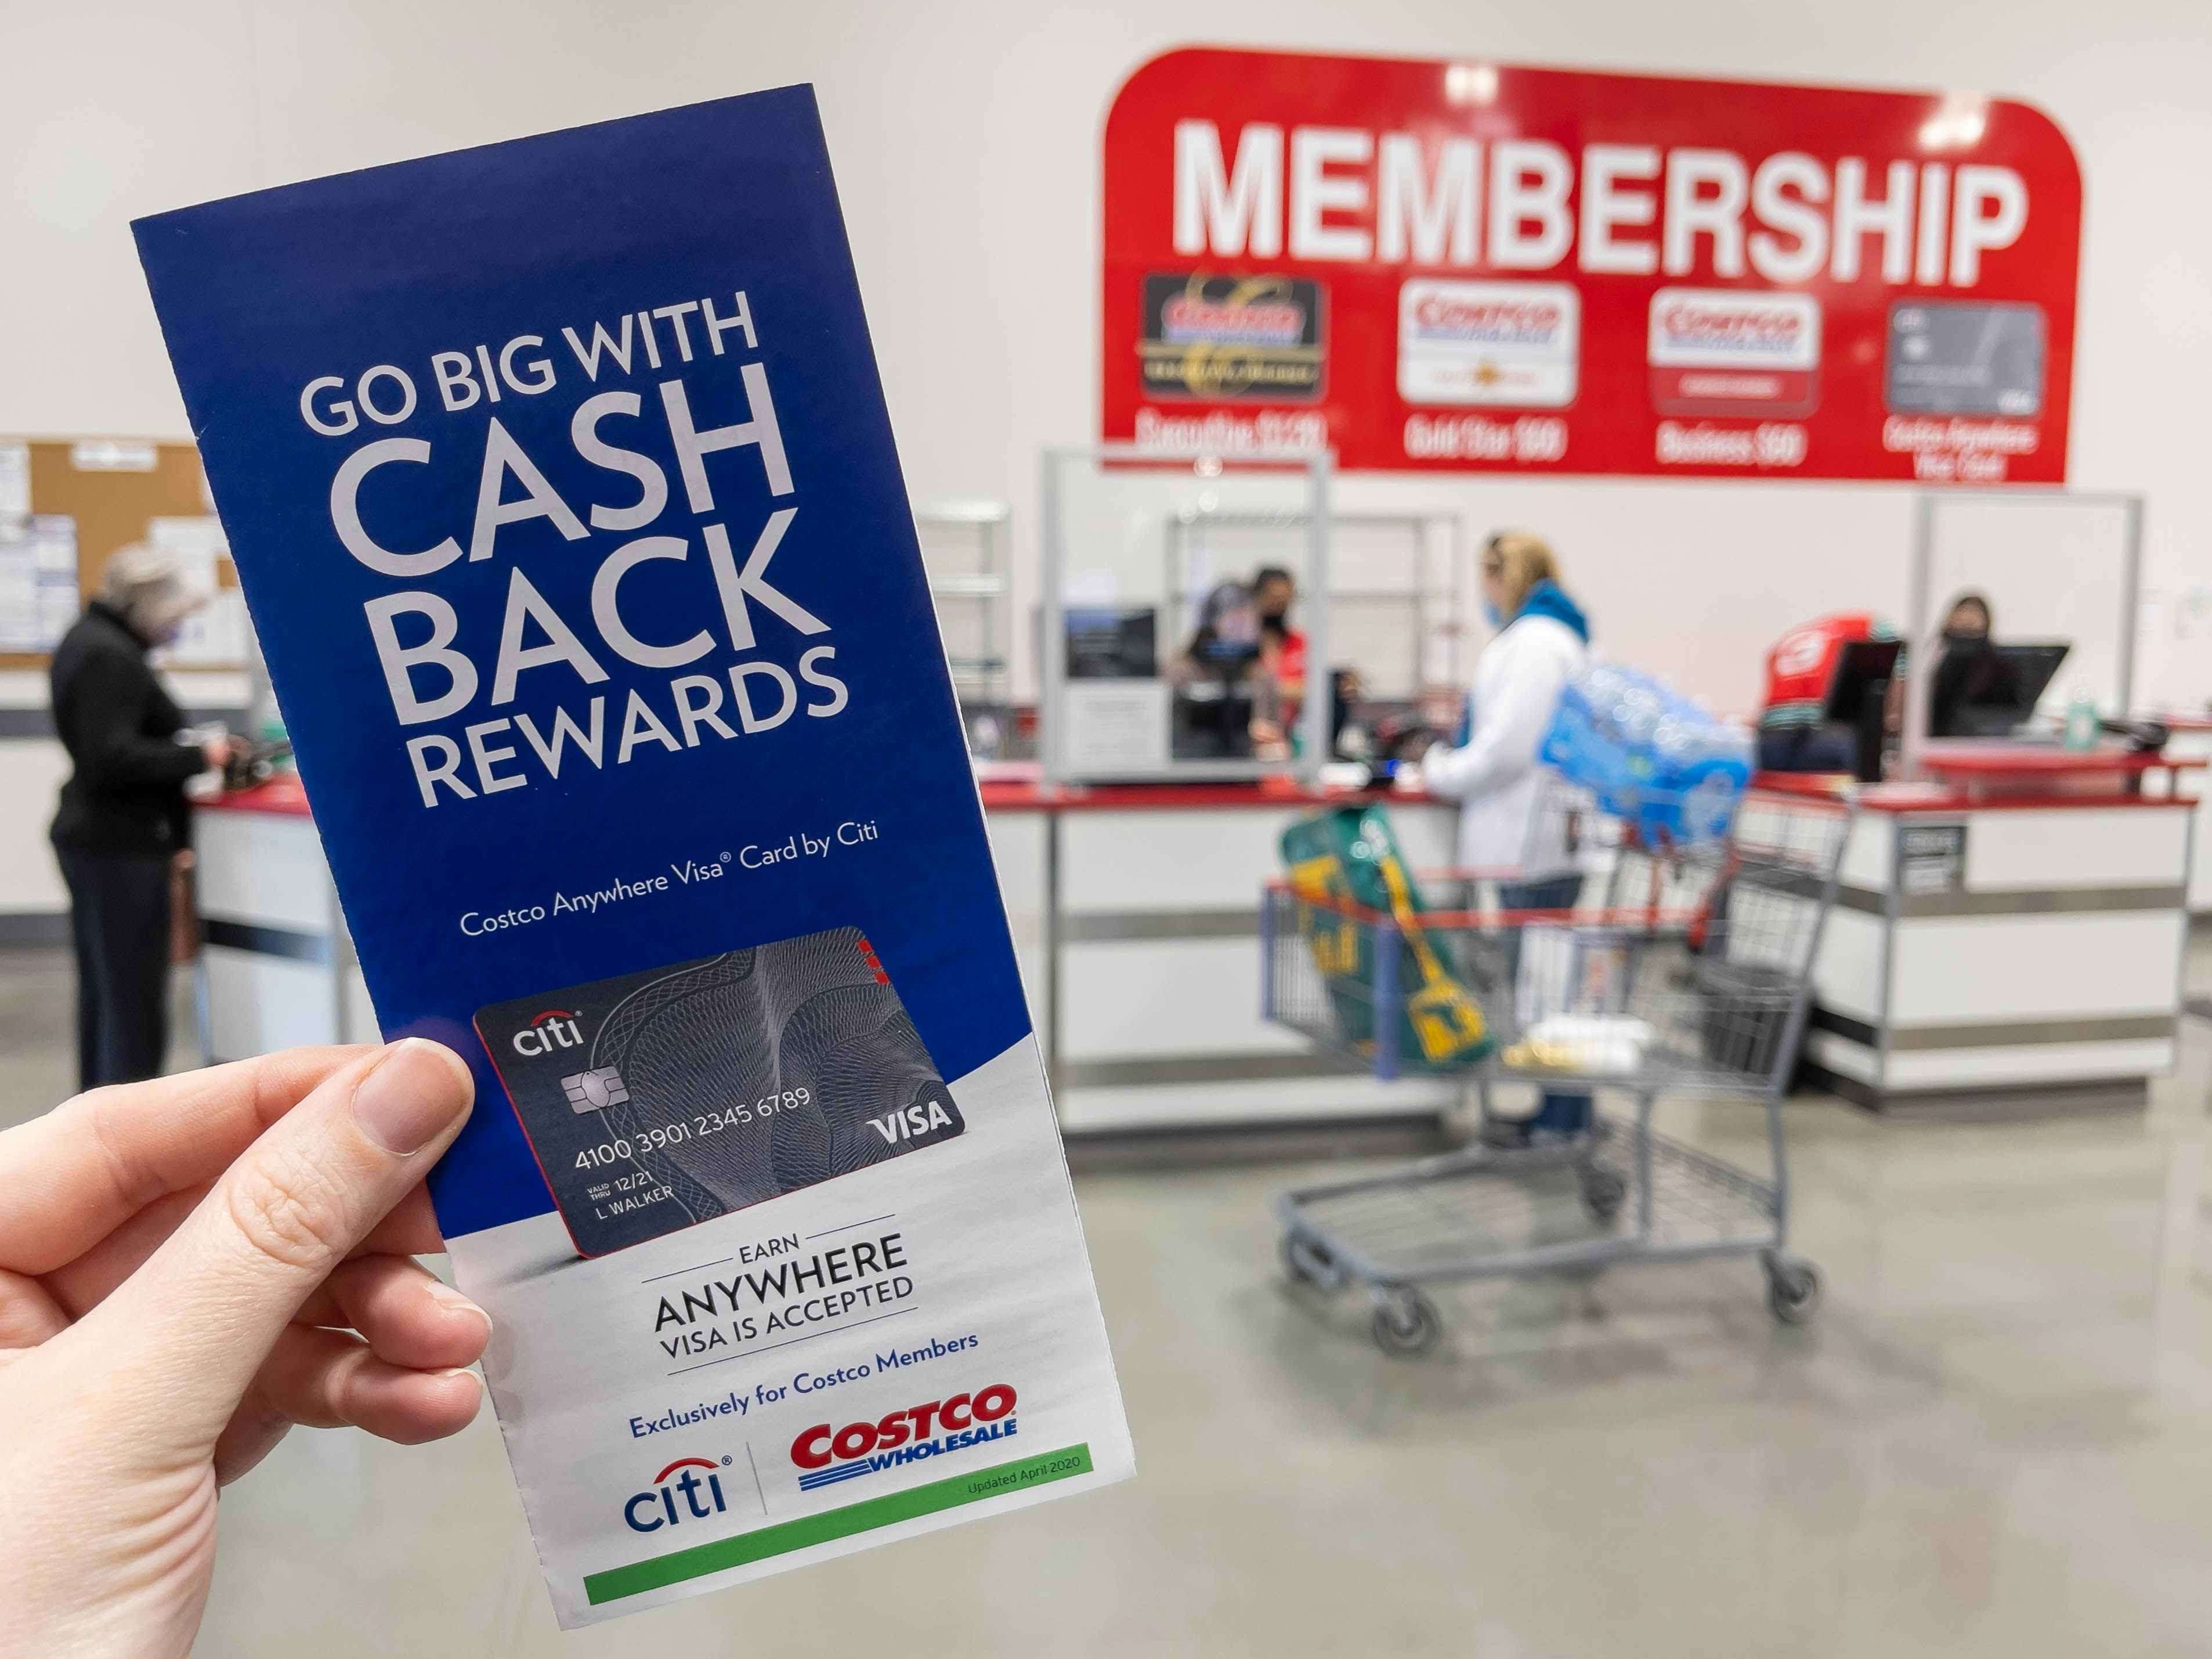 A person holding a pamphlet for information on a Costco Credit card